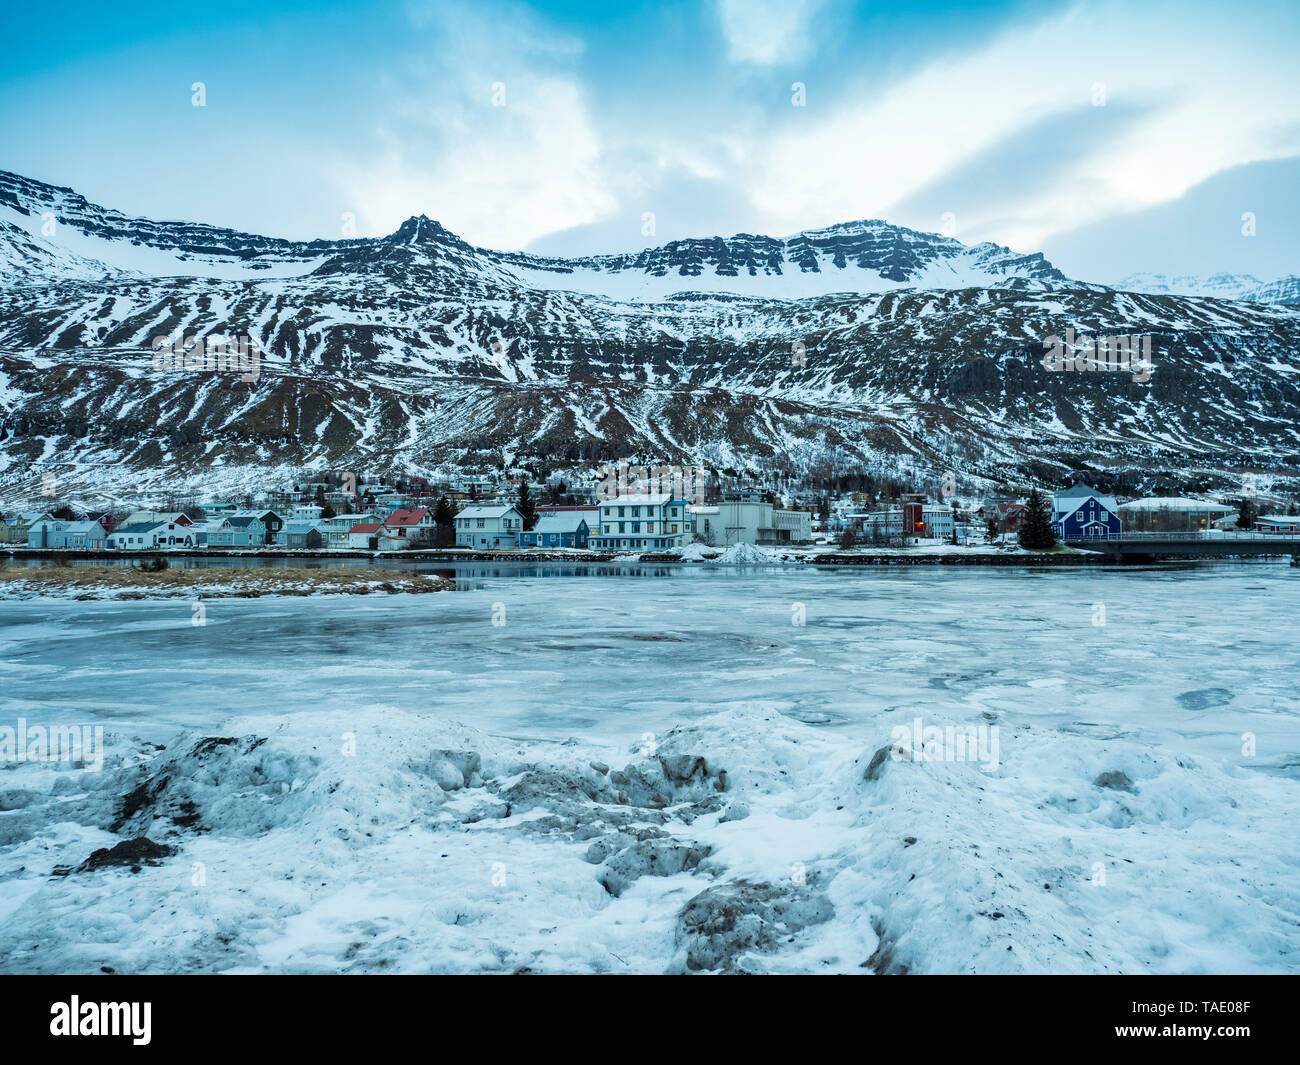 Iceland, Fjardara, the seal resting place with mountains of the it in winter with ice and snow Stock Photo